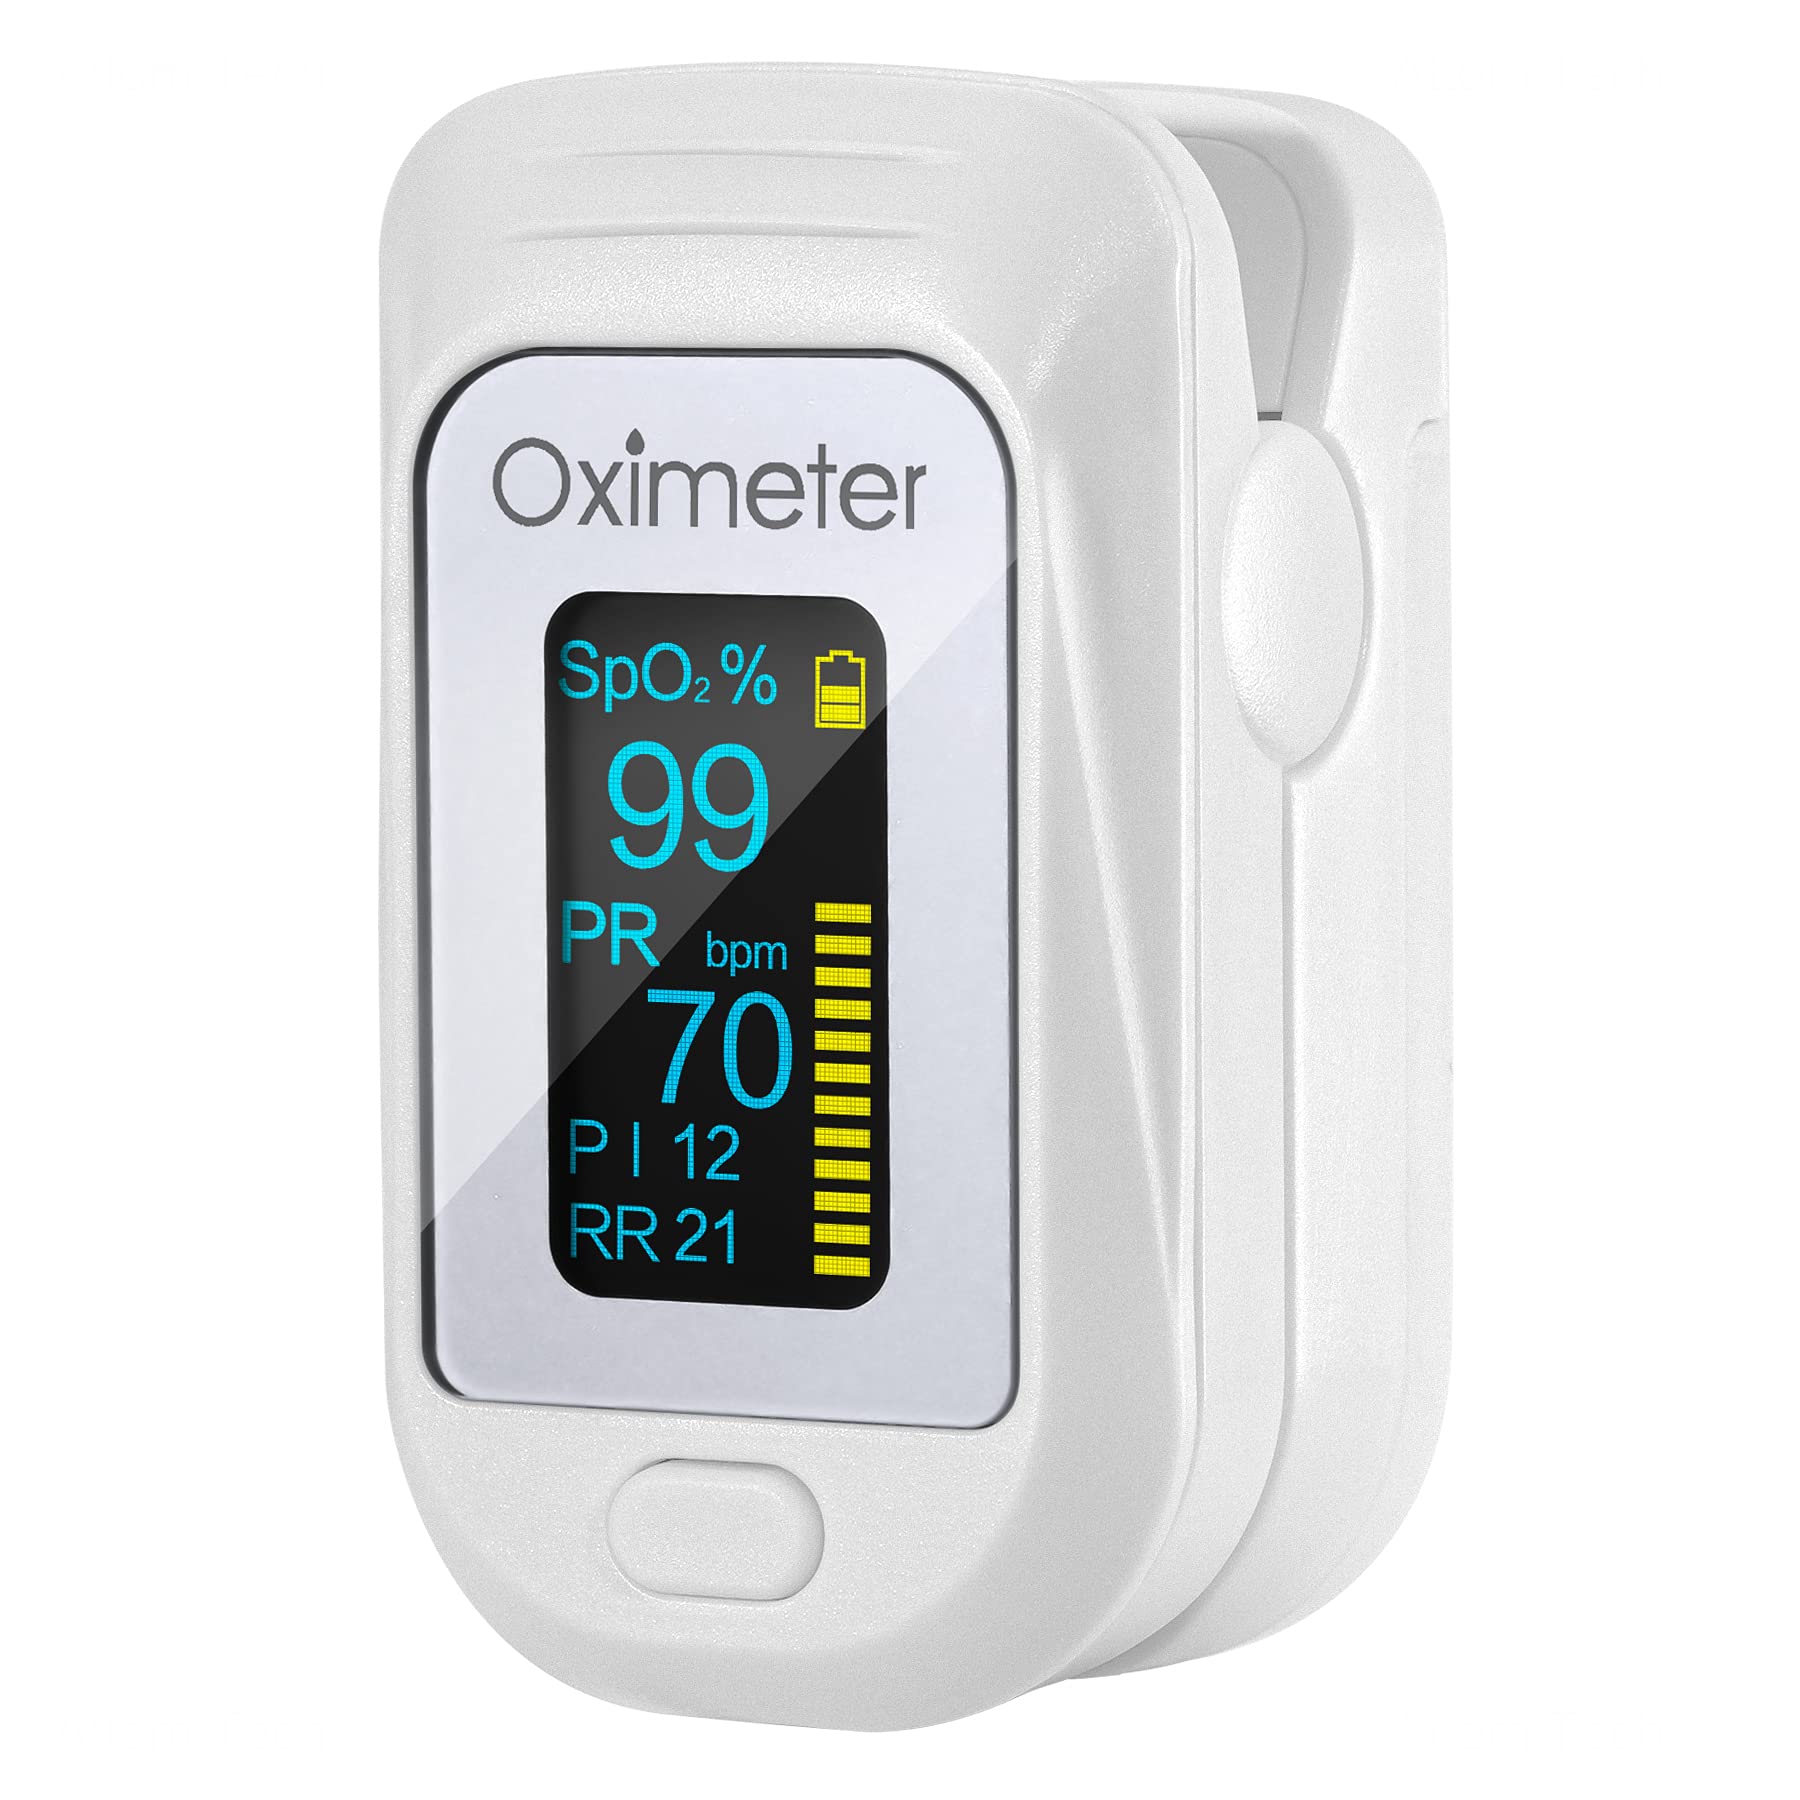 Tomorotec M130 Fingertip Pulse Oximeter Accurate Blood Oxygen Saturation Level (SpO2), Perfusion Index (PI), Pulse Rate (PR), Re